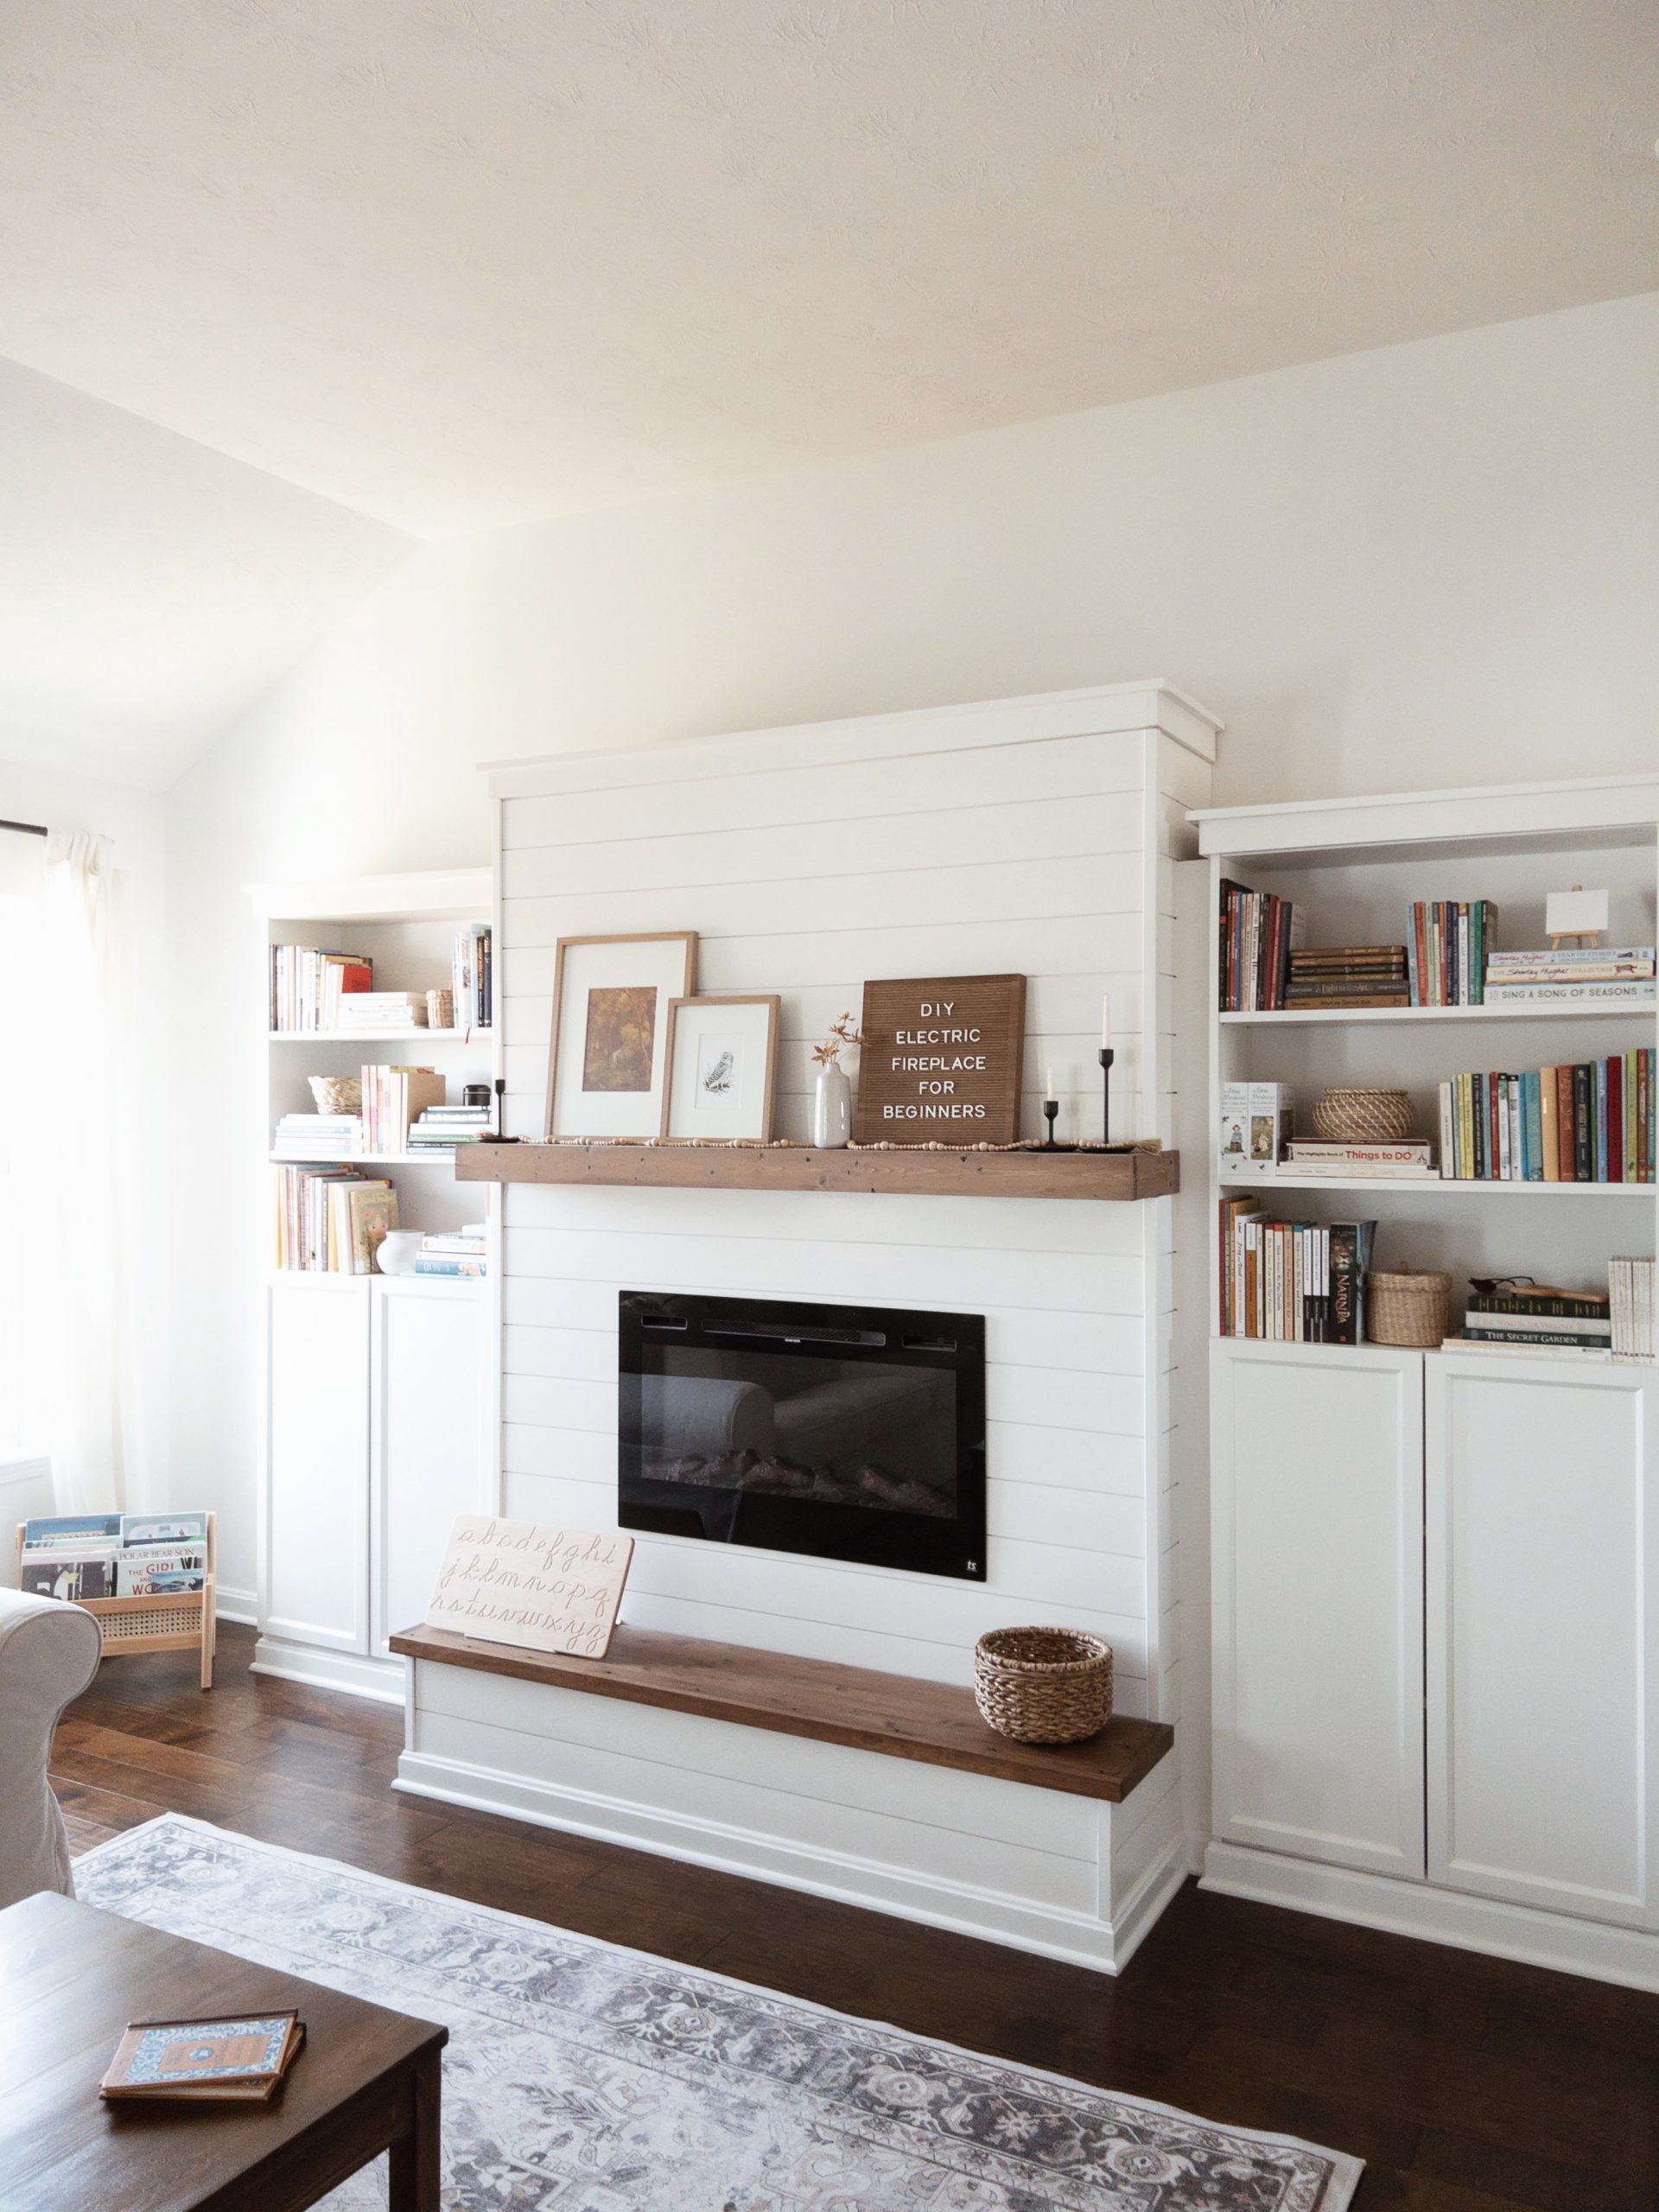 How to build a DIY Electric Fireplace with Built-In Bookshelves from IKEA. You can have your very own fireplace and mantel this holiday season. Follow our step-by-step tutorial to learn how today!